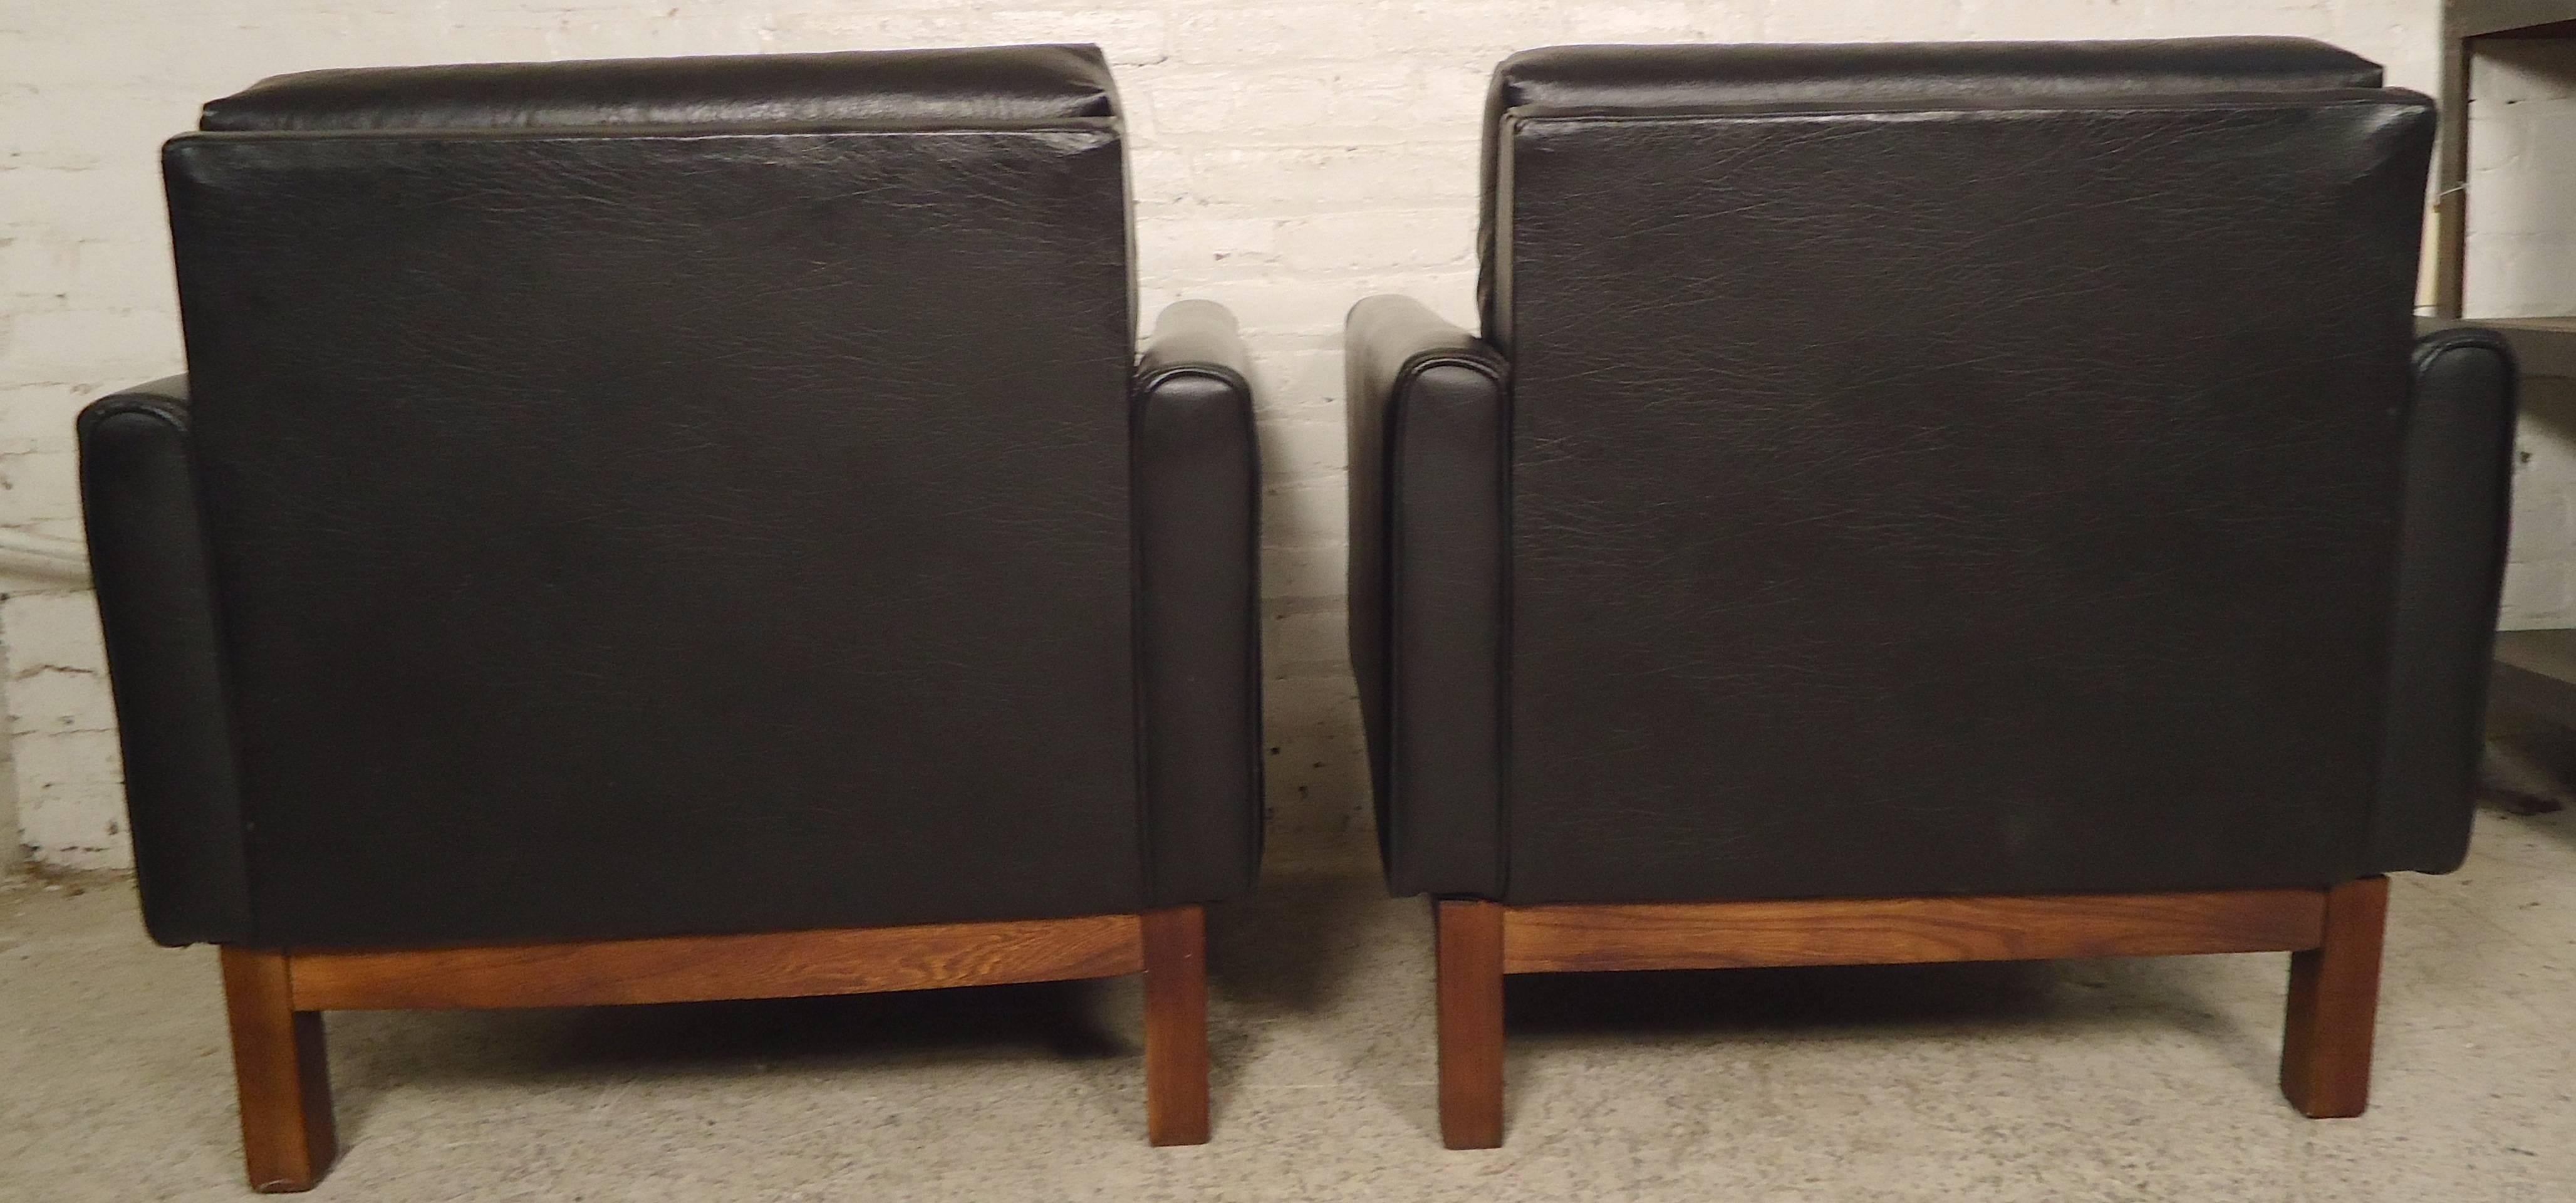 Classic black vinyl armchairs with simple lines and comfortable cushioning. Attractive teakwood frame adds to the handsome Mid-Century Modern feel.

(Please confirm item location NY or NJ with dealer).
 